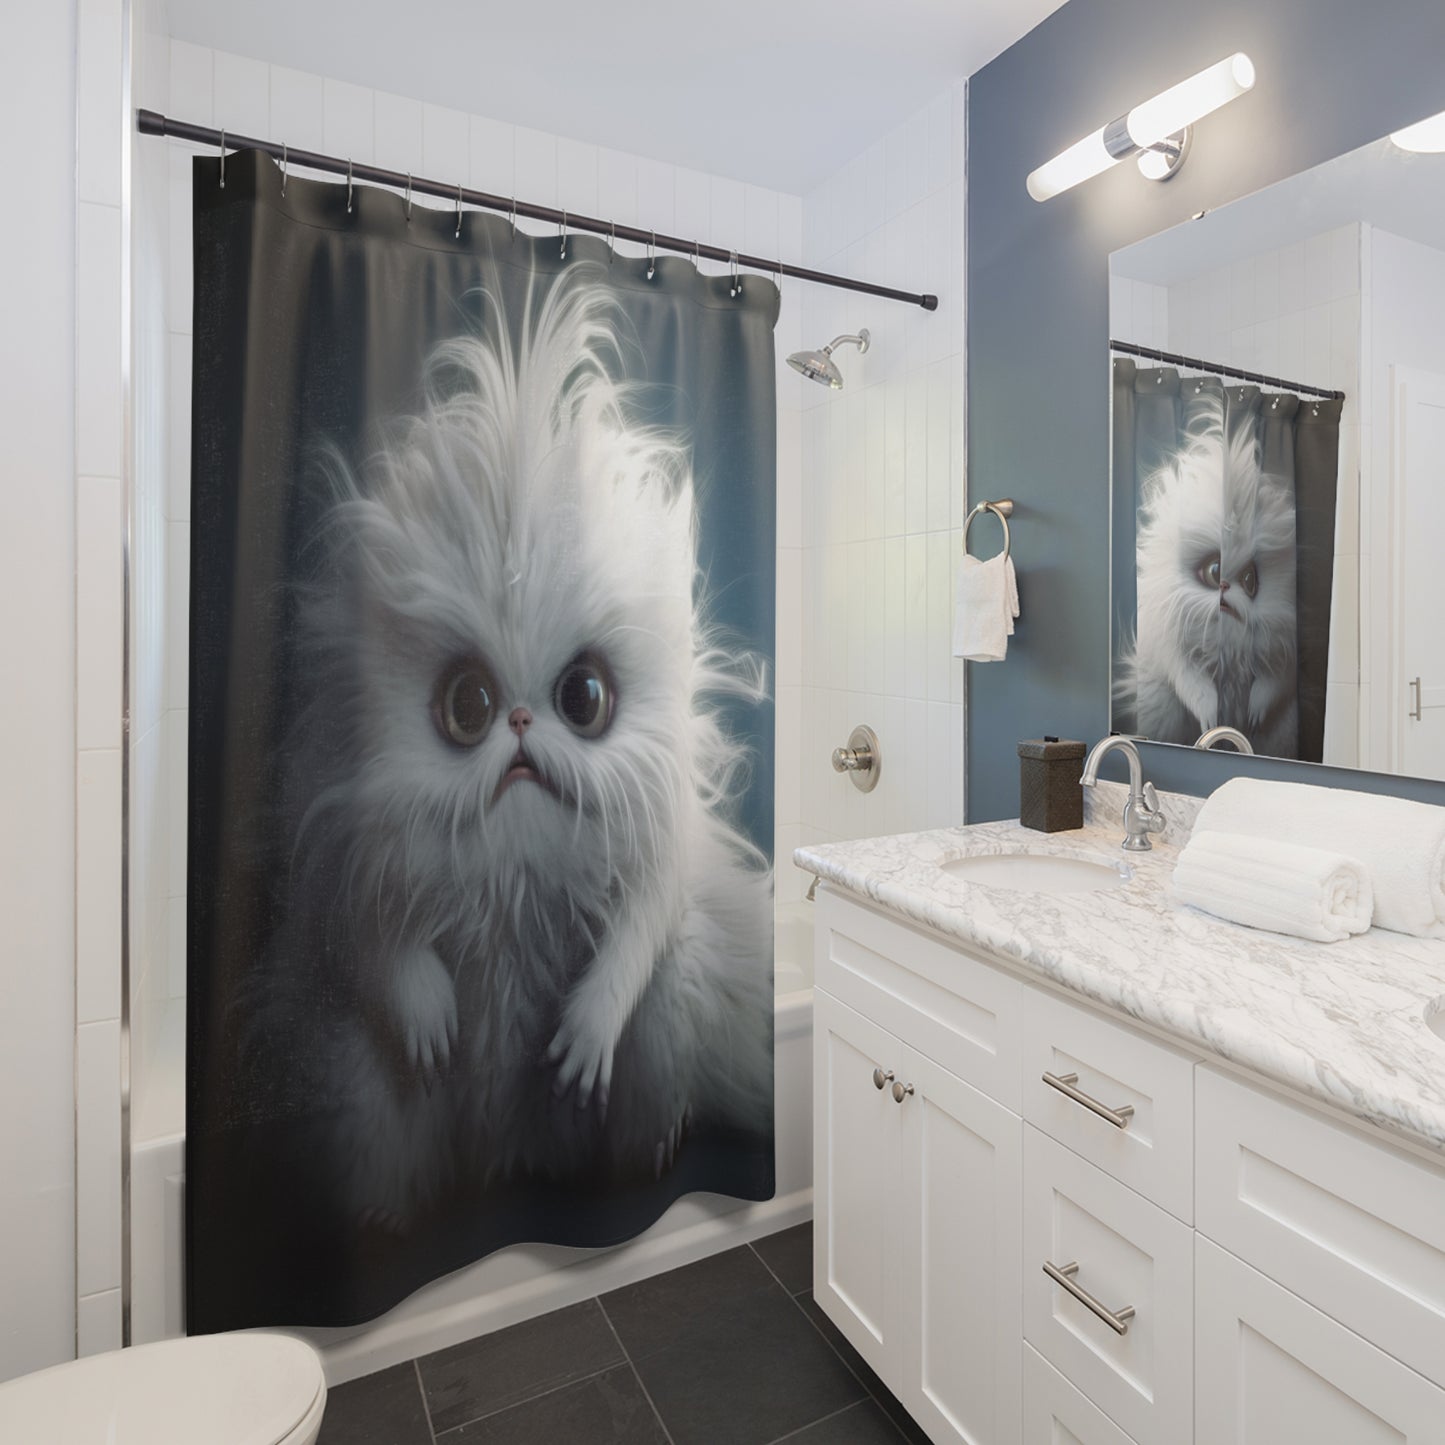 Energize Your Mornings with the Morning Creature Shower Curtain